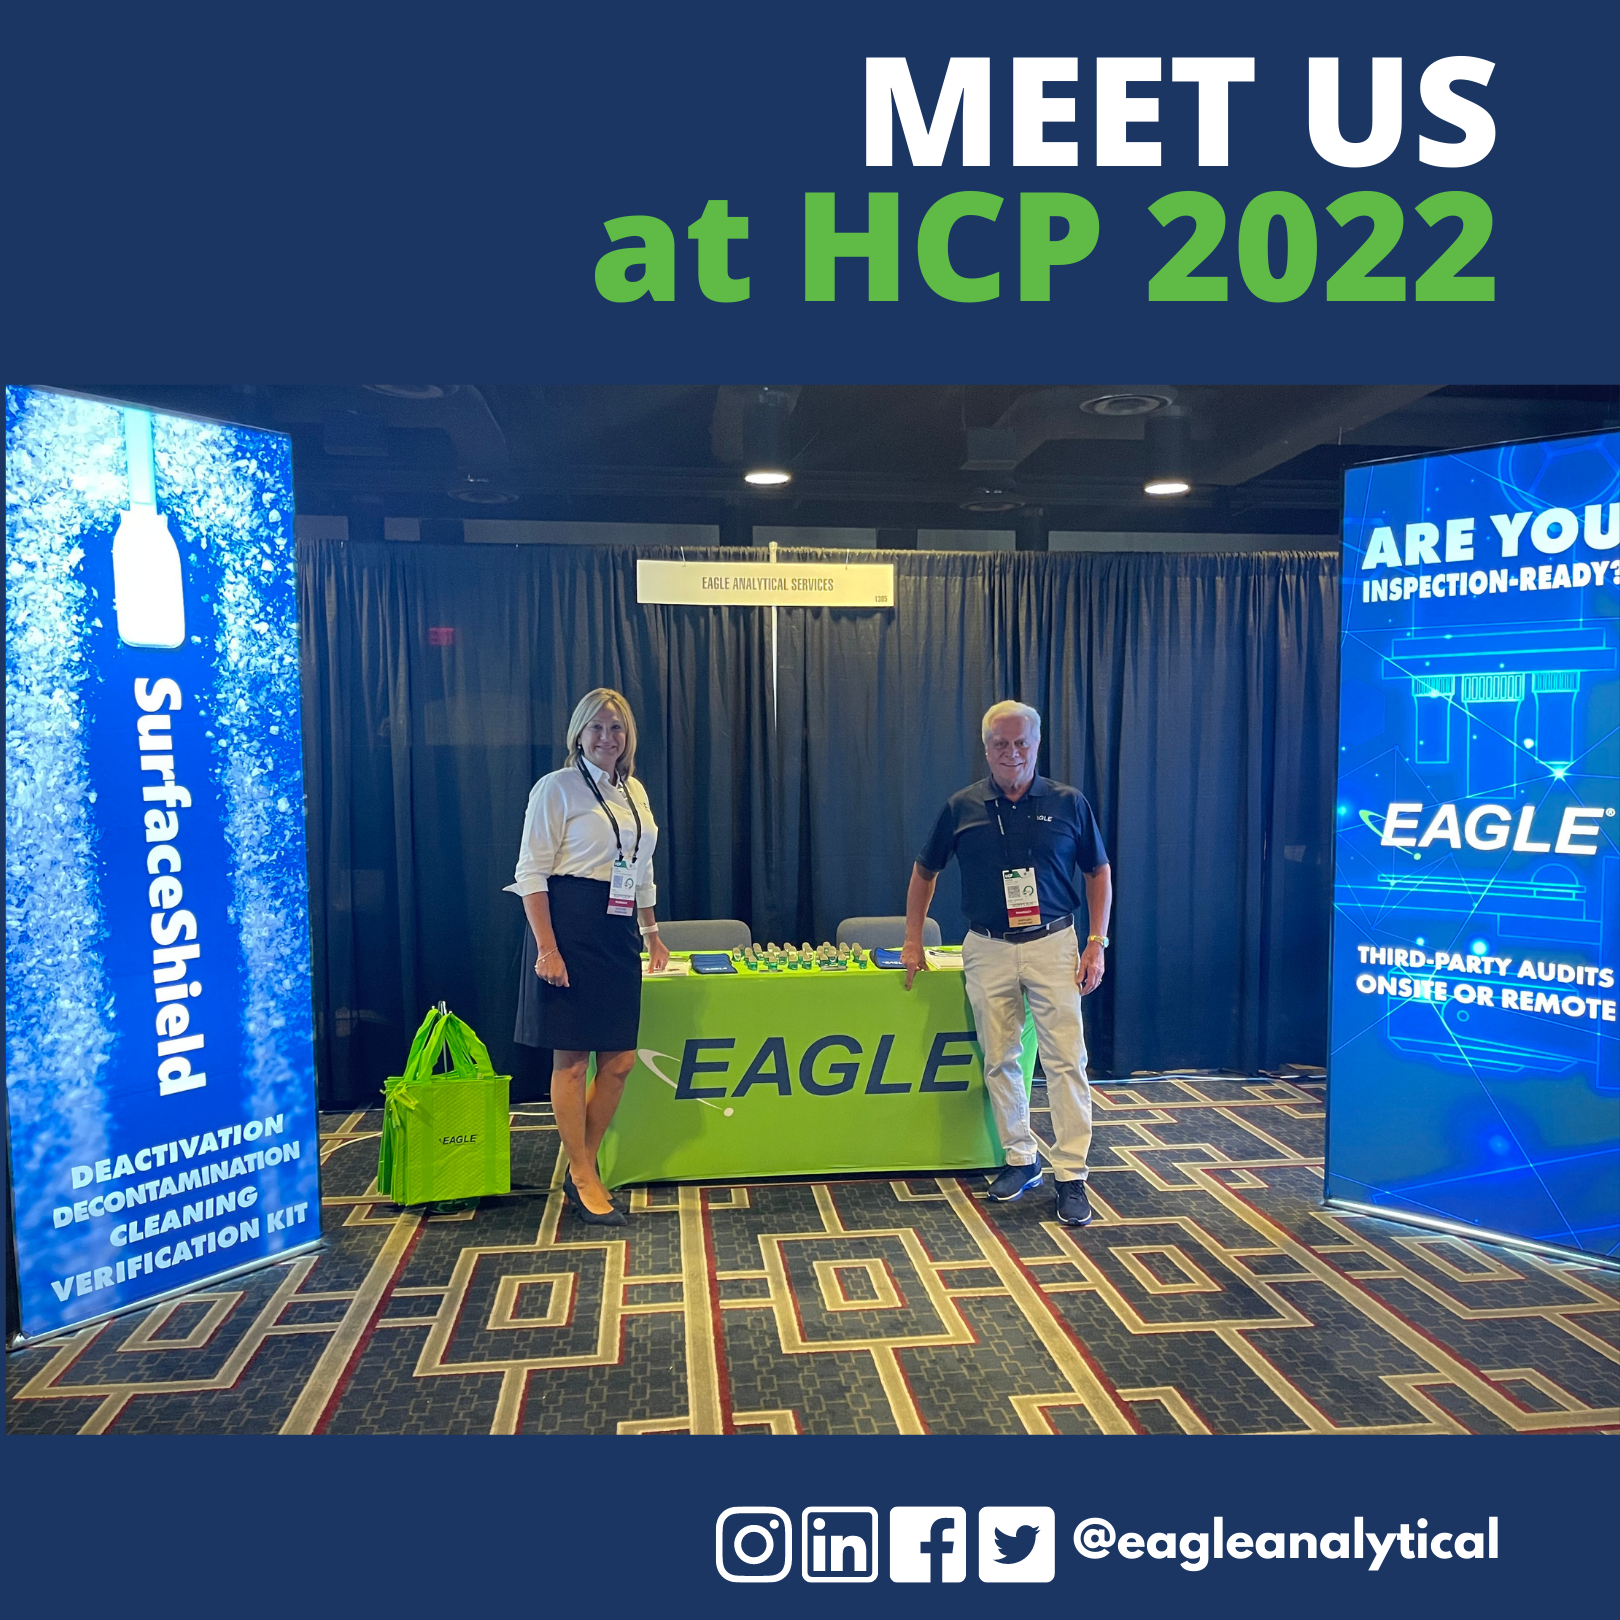 An image of Eagle's CEO and President Ross Caputo and Vice President of Marketing and Business Development Lisa Johnson smiling and standing in front of their booth at HCP. Text states, "Meet Us at HCP 2022."